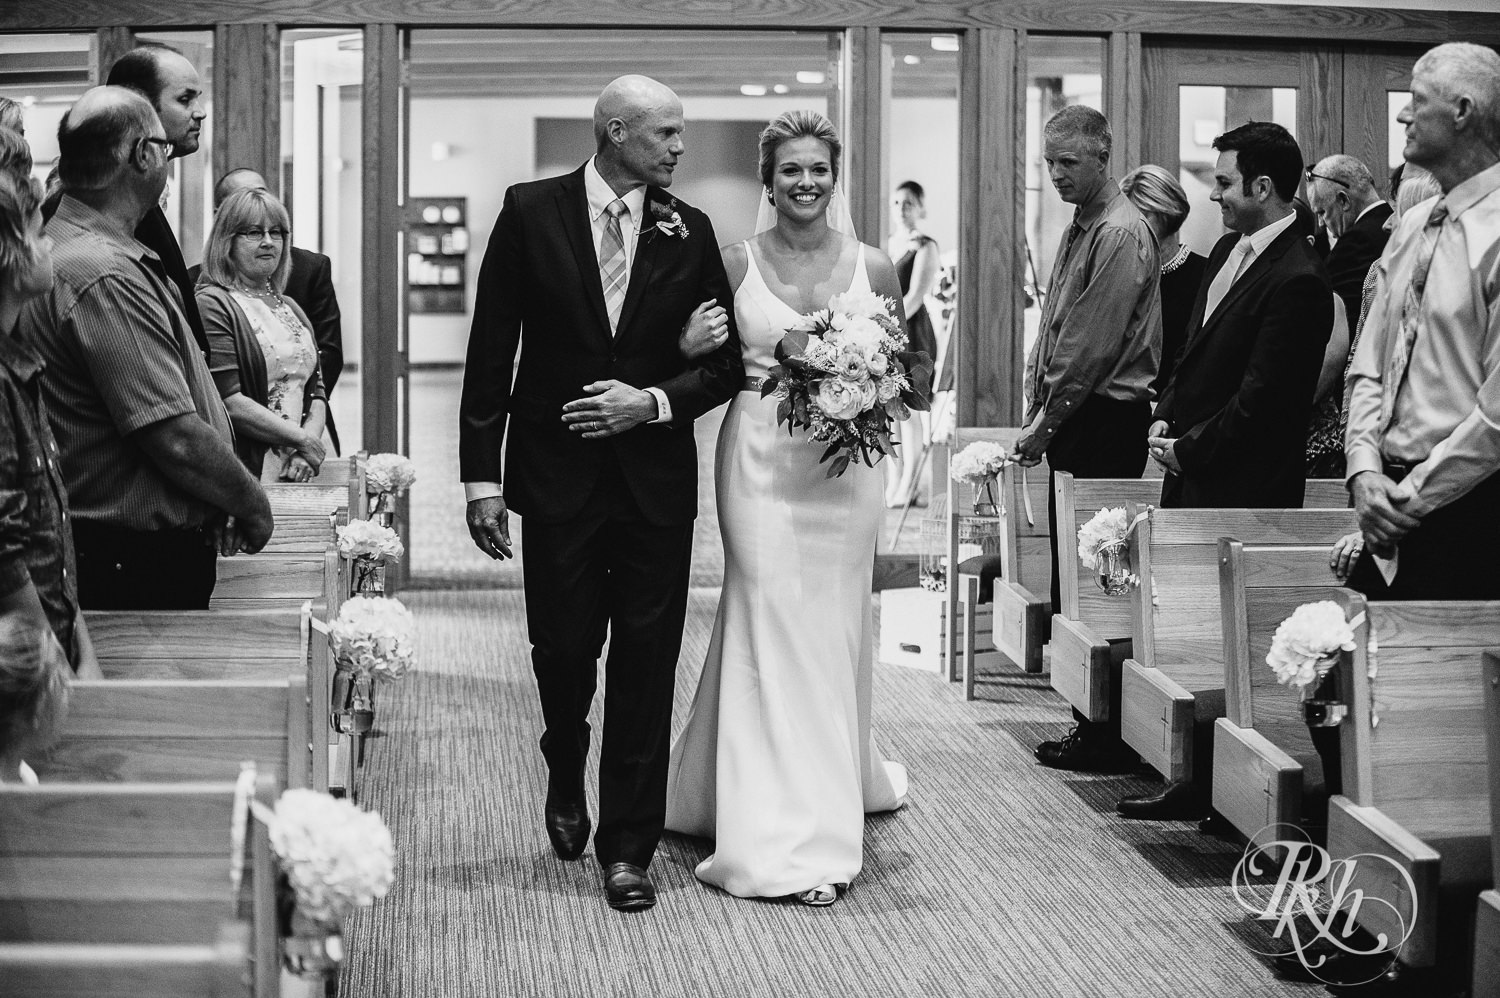 Bride and her dad walk down the aisle during a church wedding ceremony in Minneapolis, Minnesota.